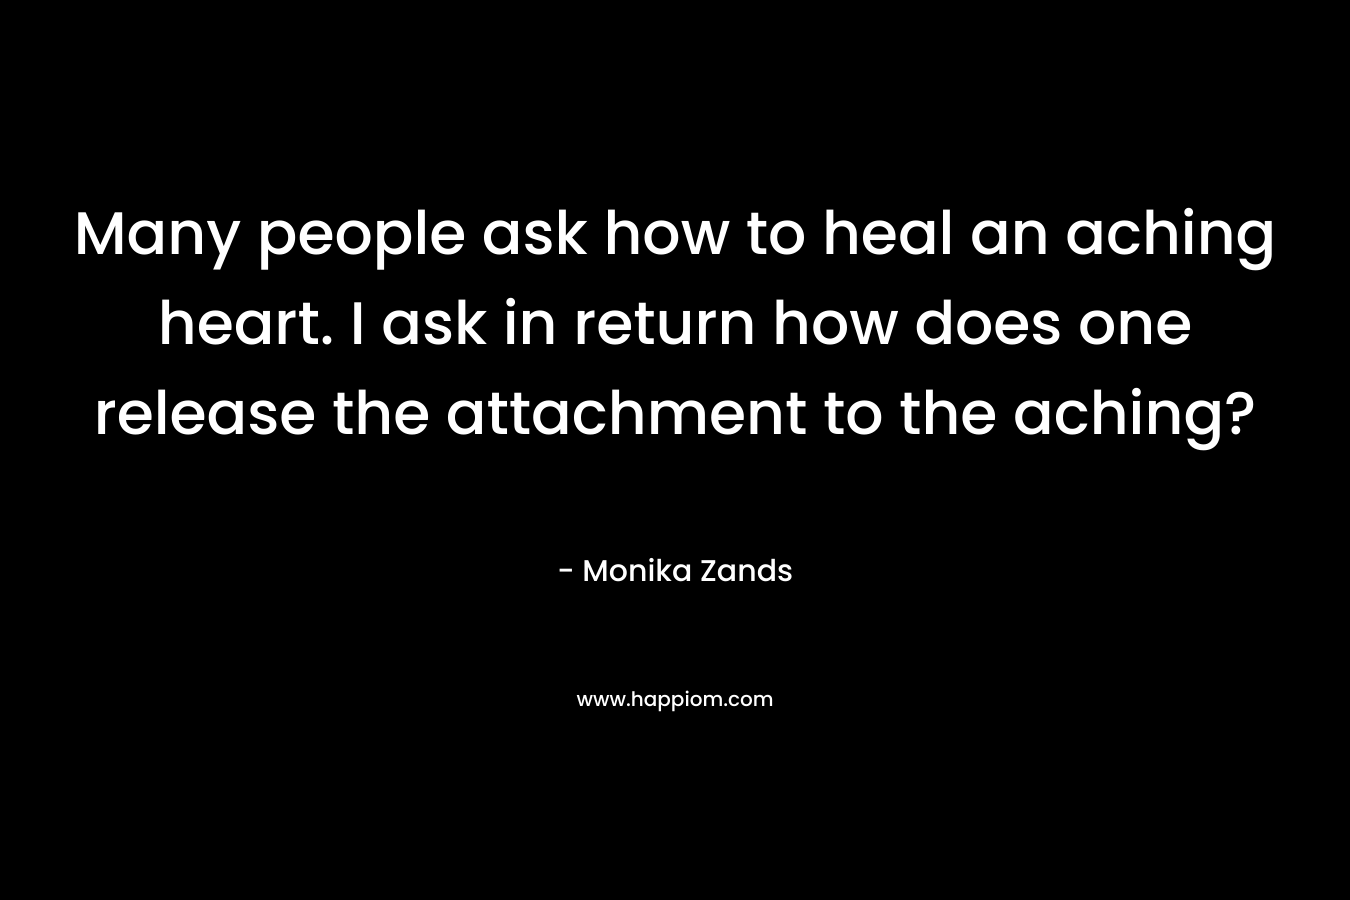 Many people ask how to heal an aching heart. I ask in return how does one release the attachment to the aching? – Monika Zands